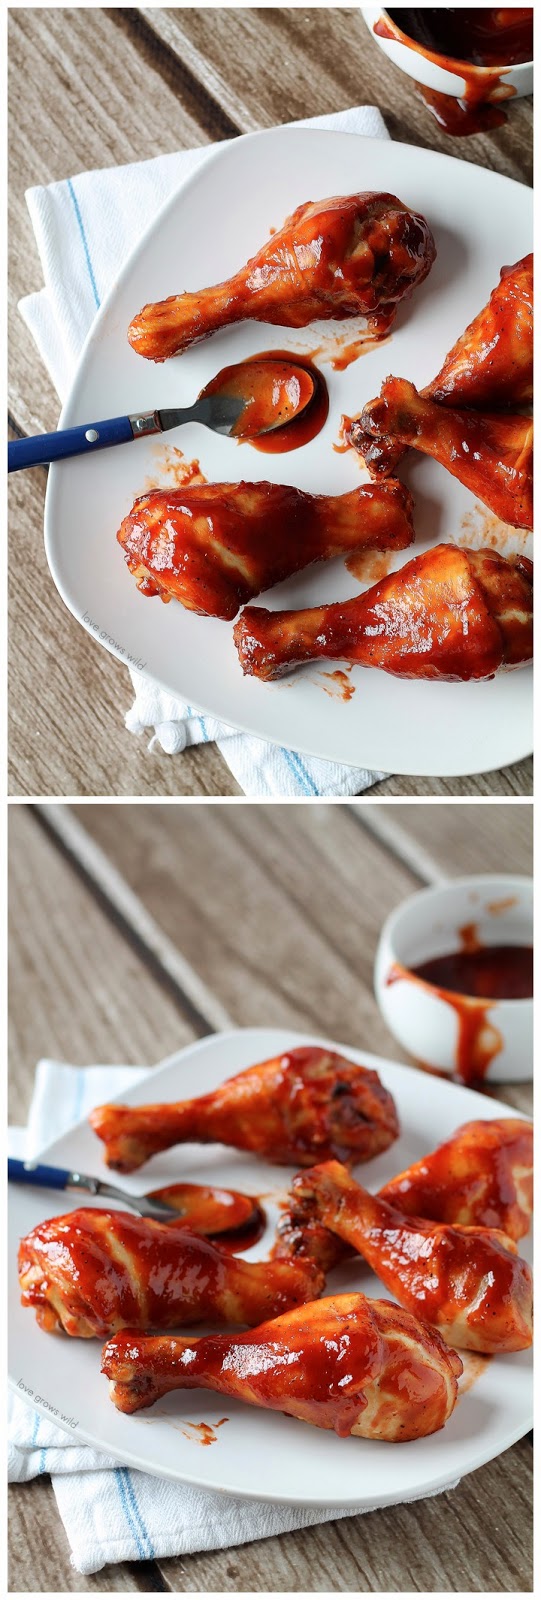 Easy Oven Baked Barbecue Chicken ~ Don't Eat Them All